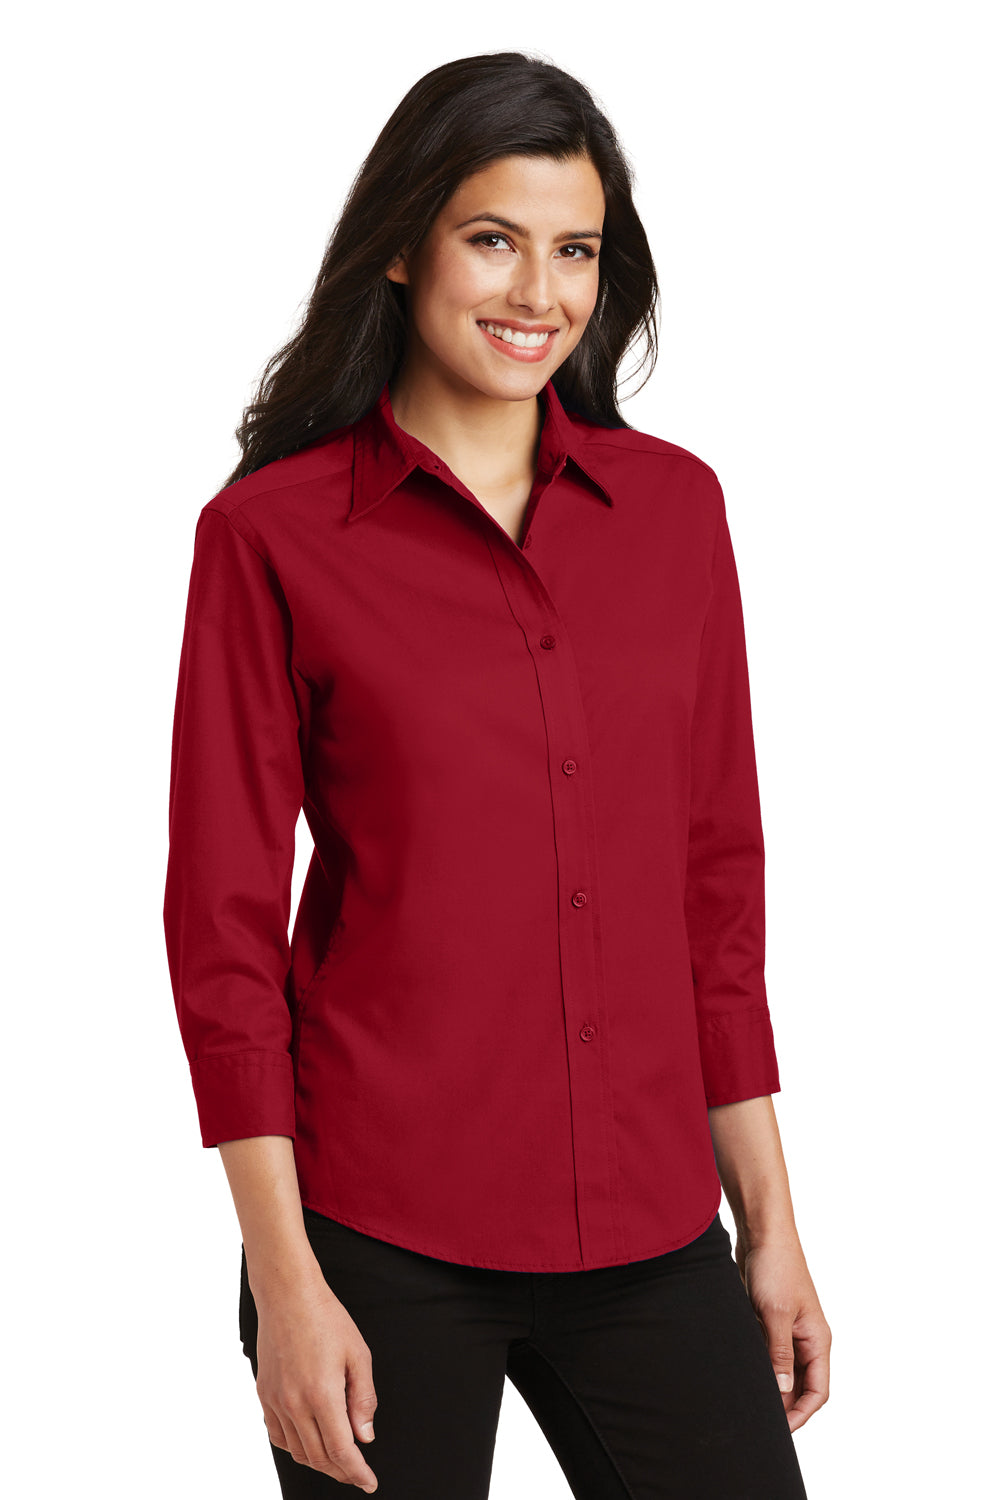 Port Authority L612 Womens Easy Care Wrinkle Resistant 3/4 Sleeve Button Down Shirt Red 3Q